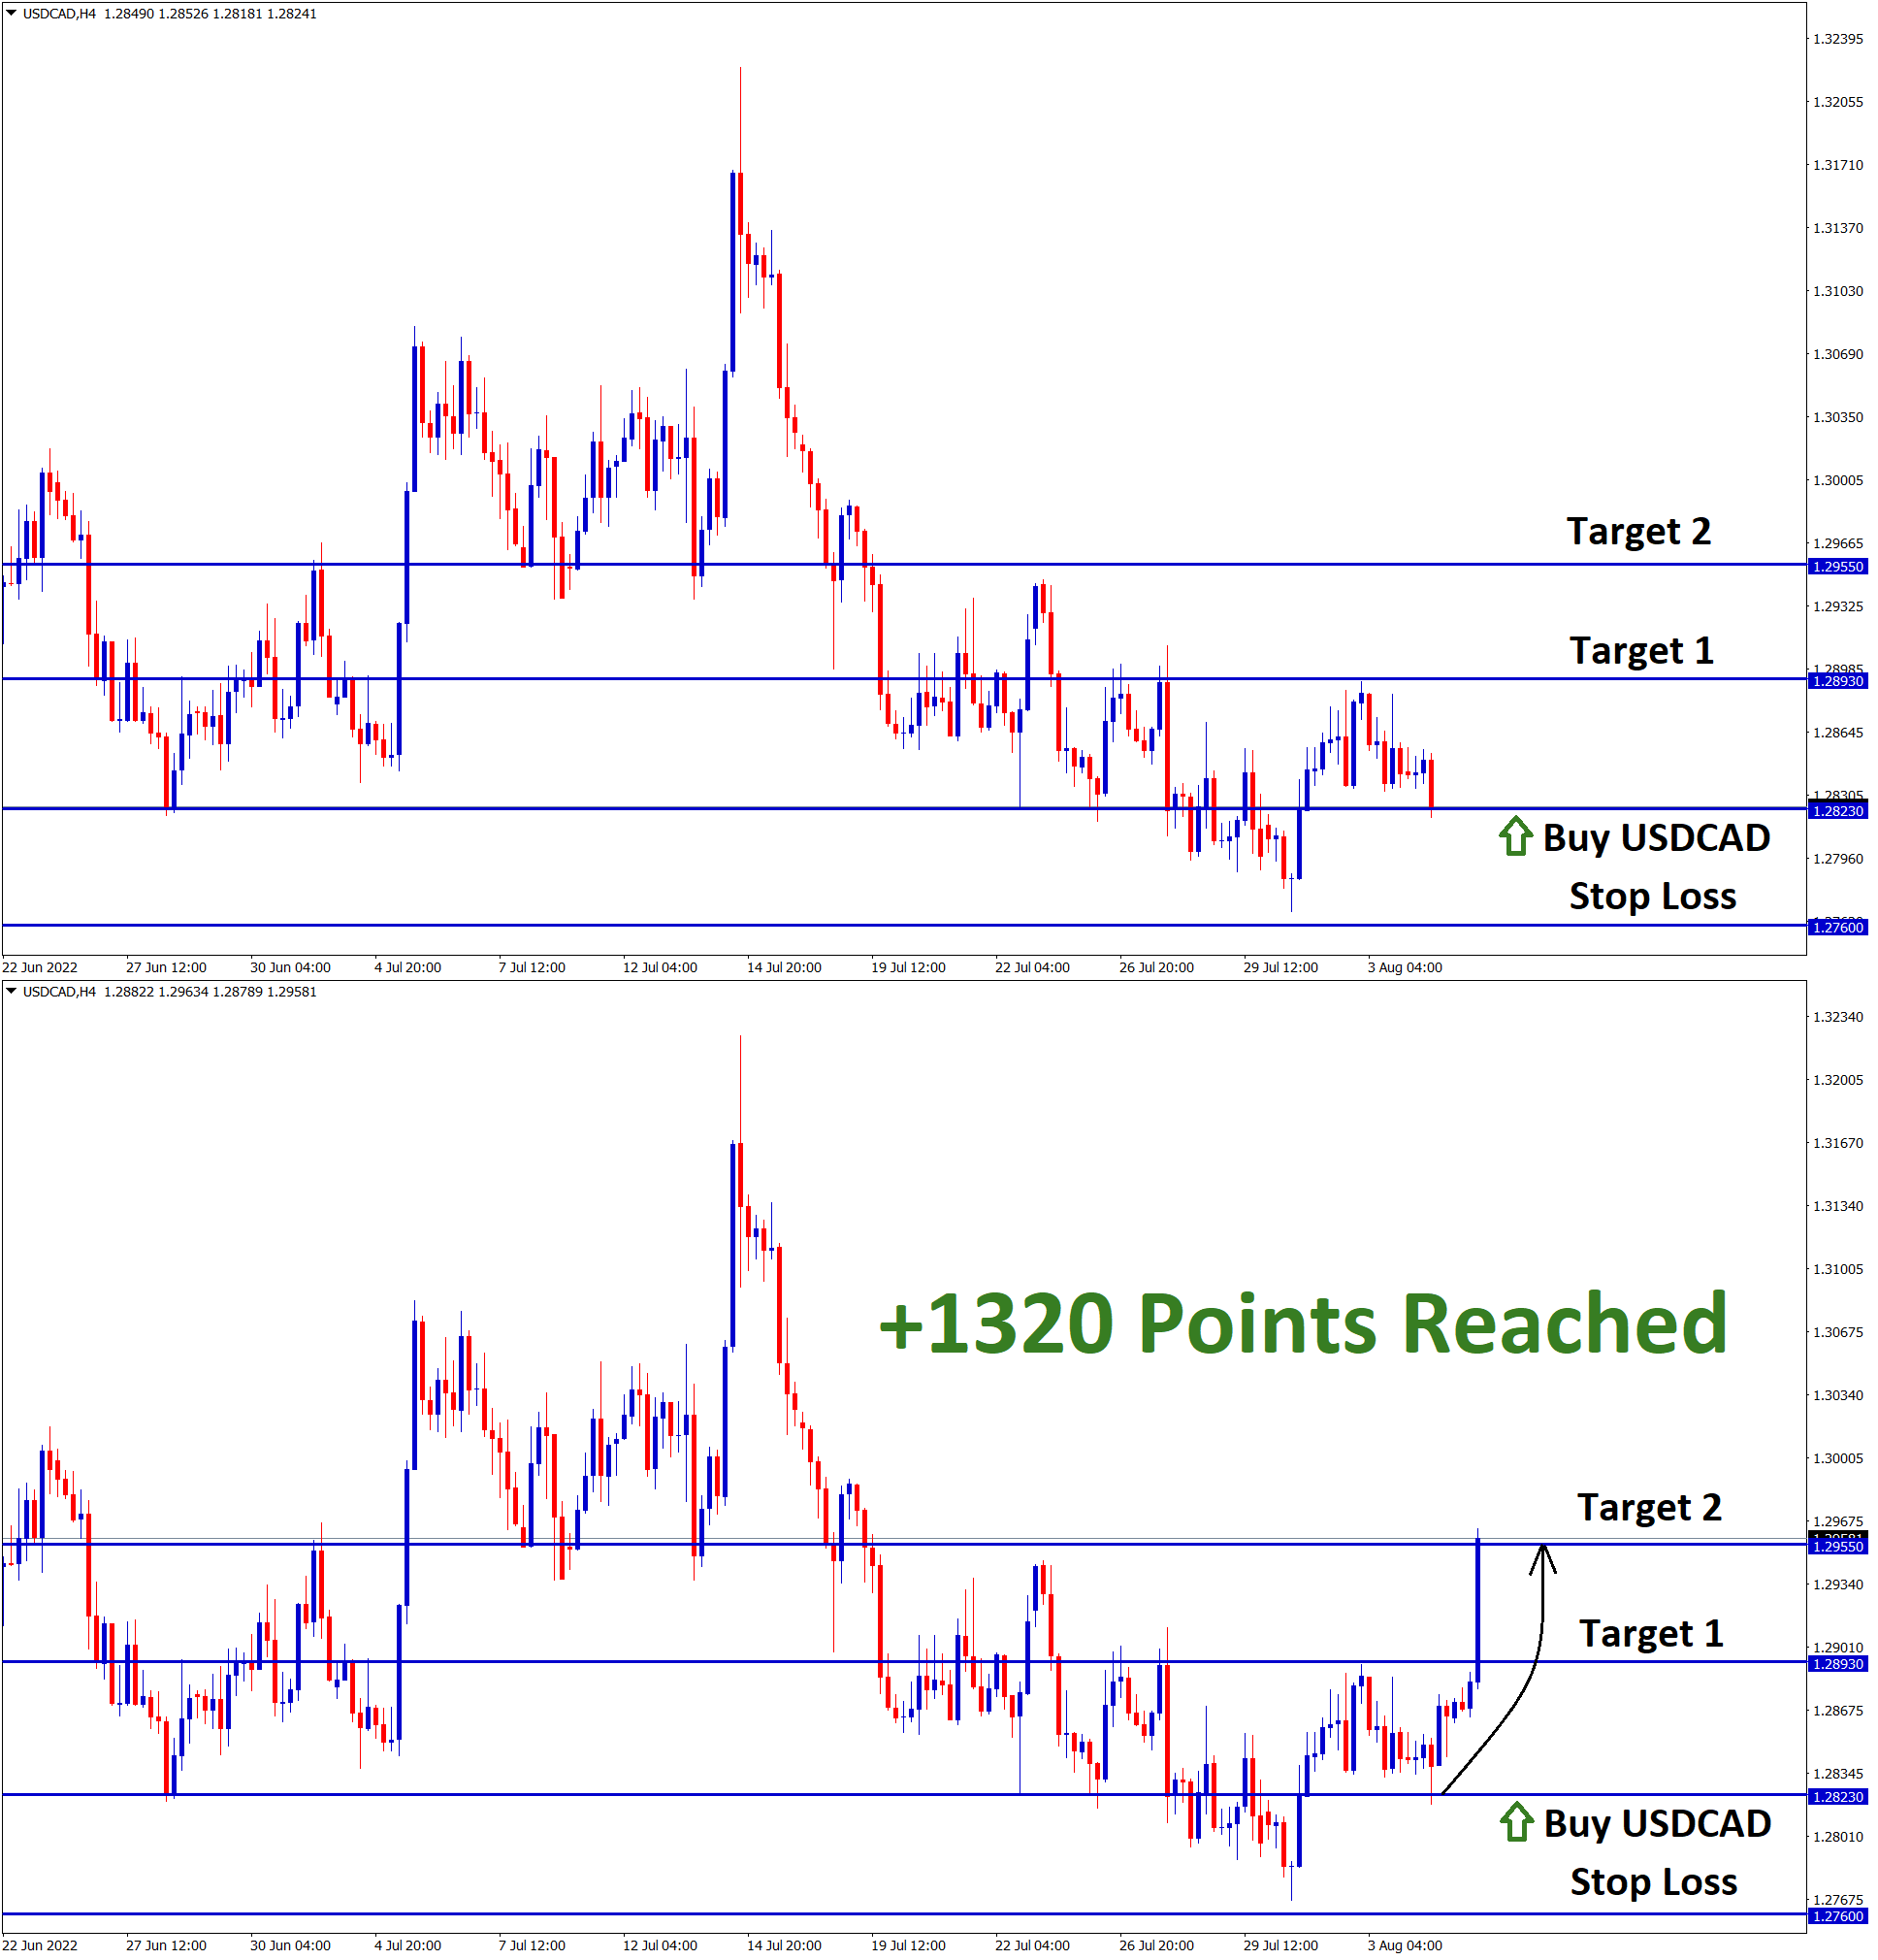 +1320 Points Reached in USDCAD Buy signal after breaking and retesting the descending channel